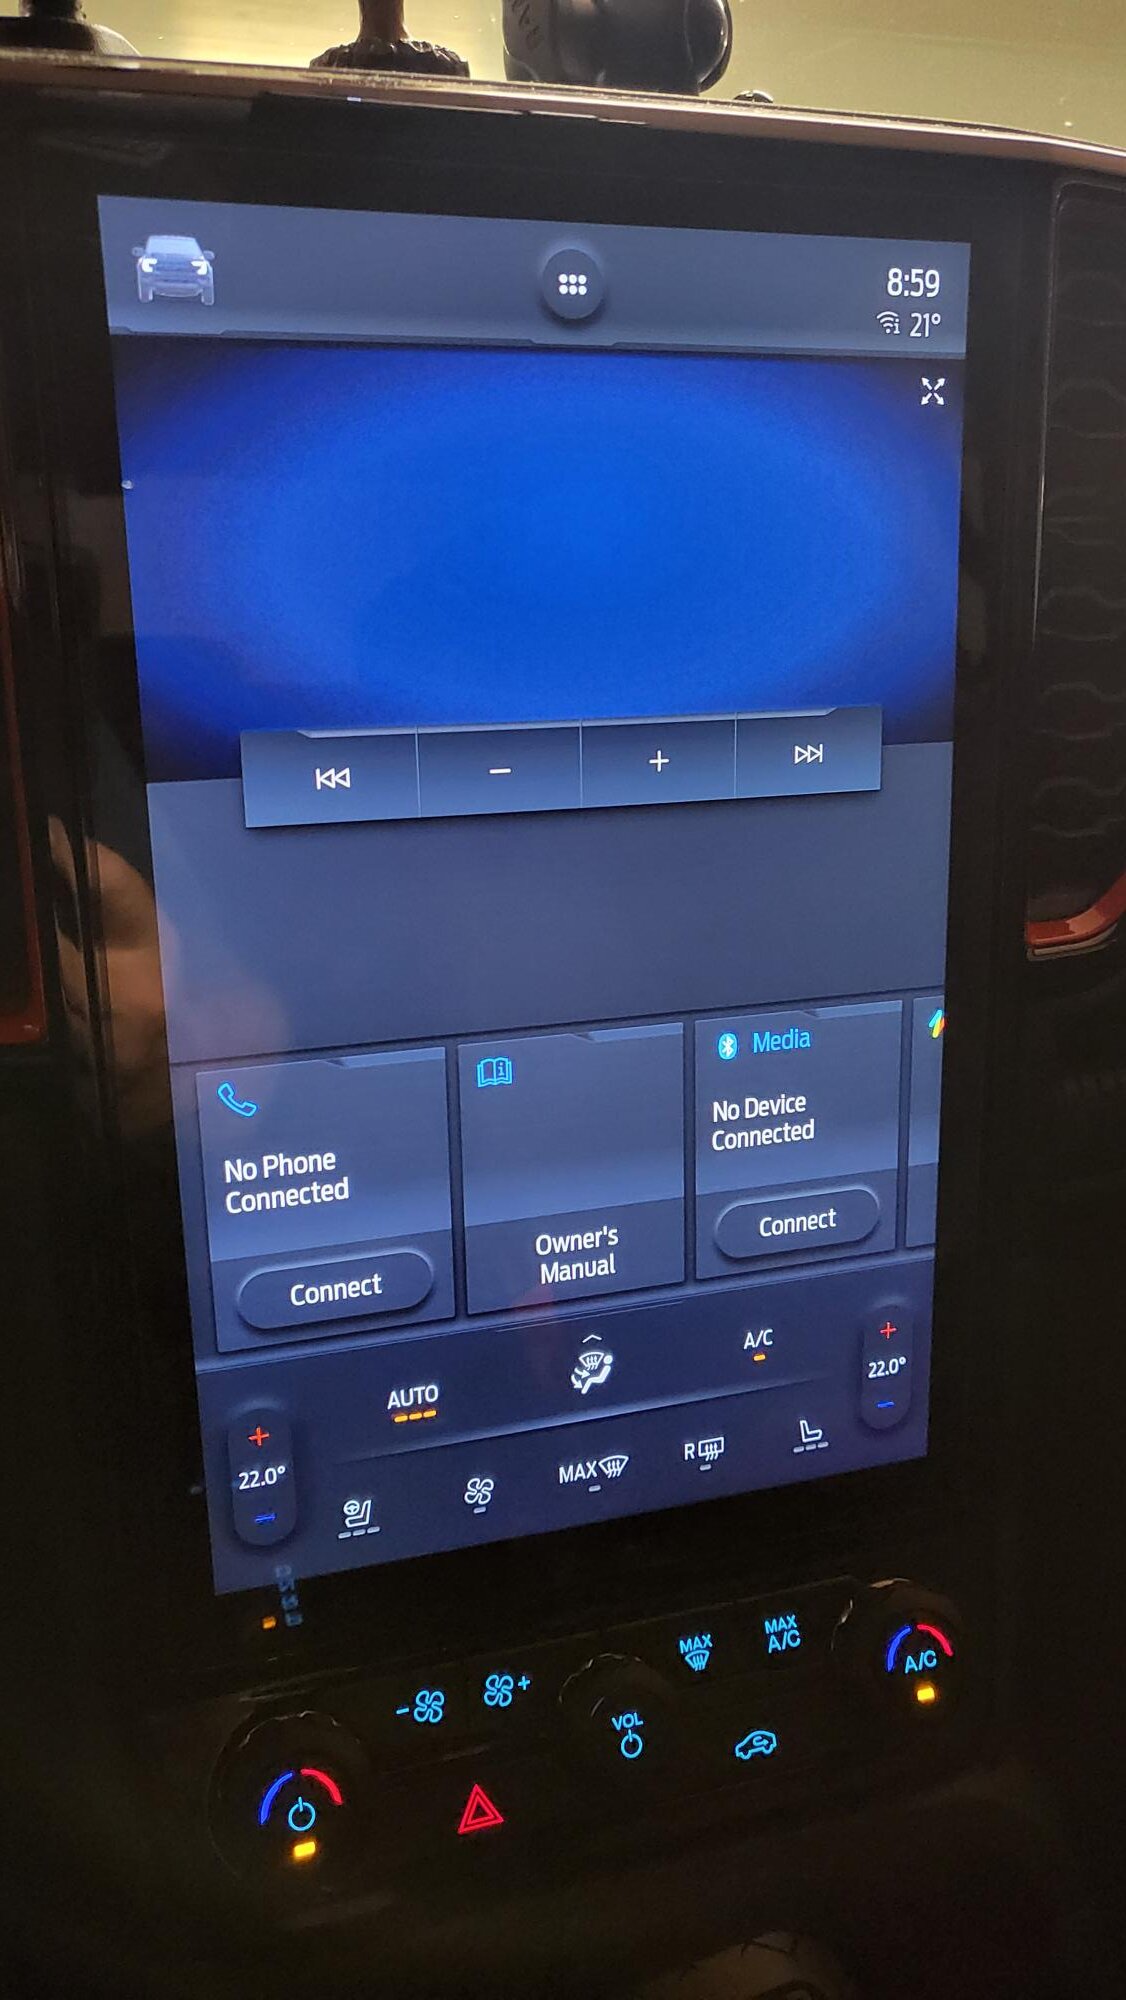 Ford Ranger Sync 12" Screen Freezing up. - Fixing in Progress 20230616_090032